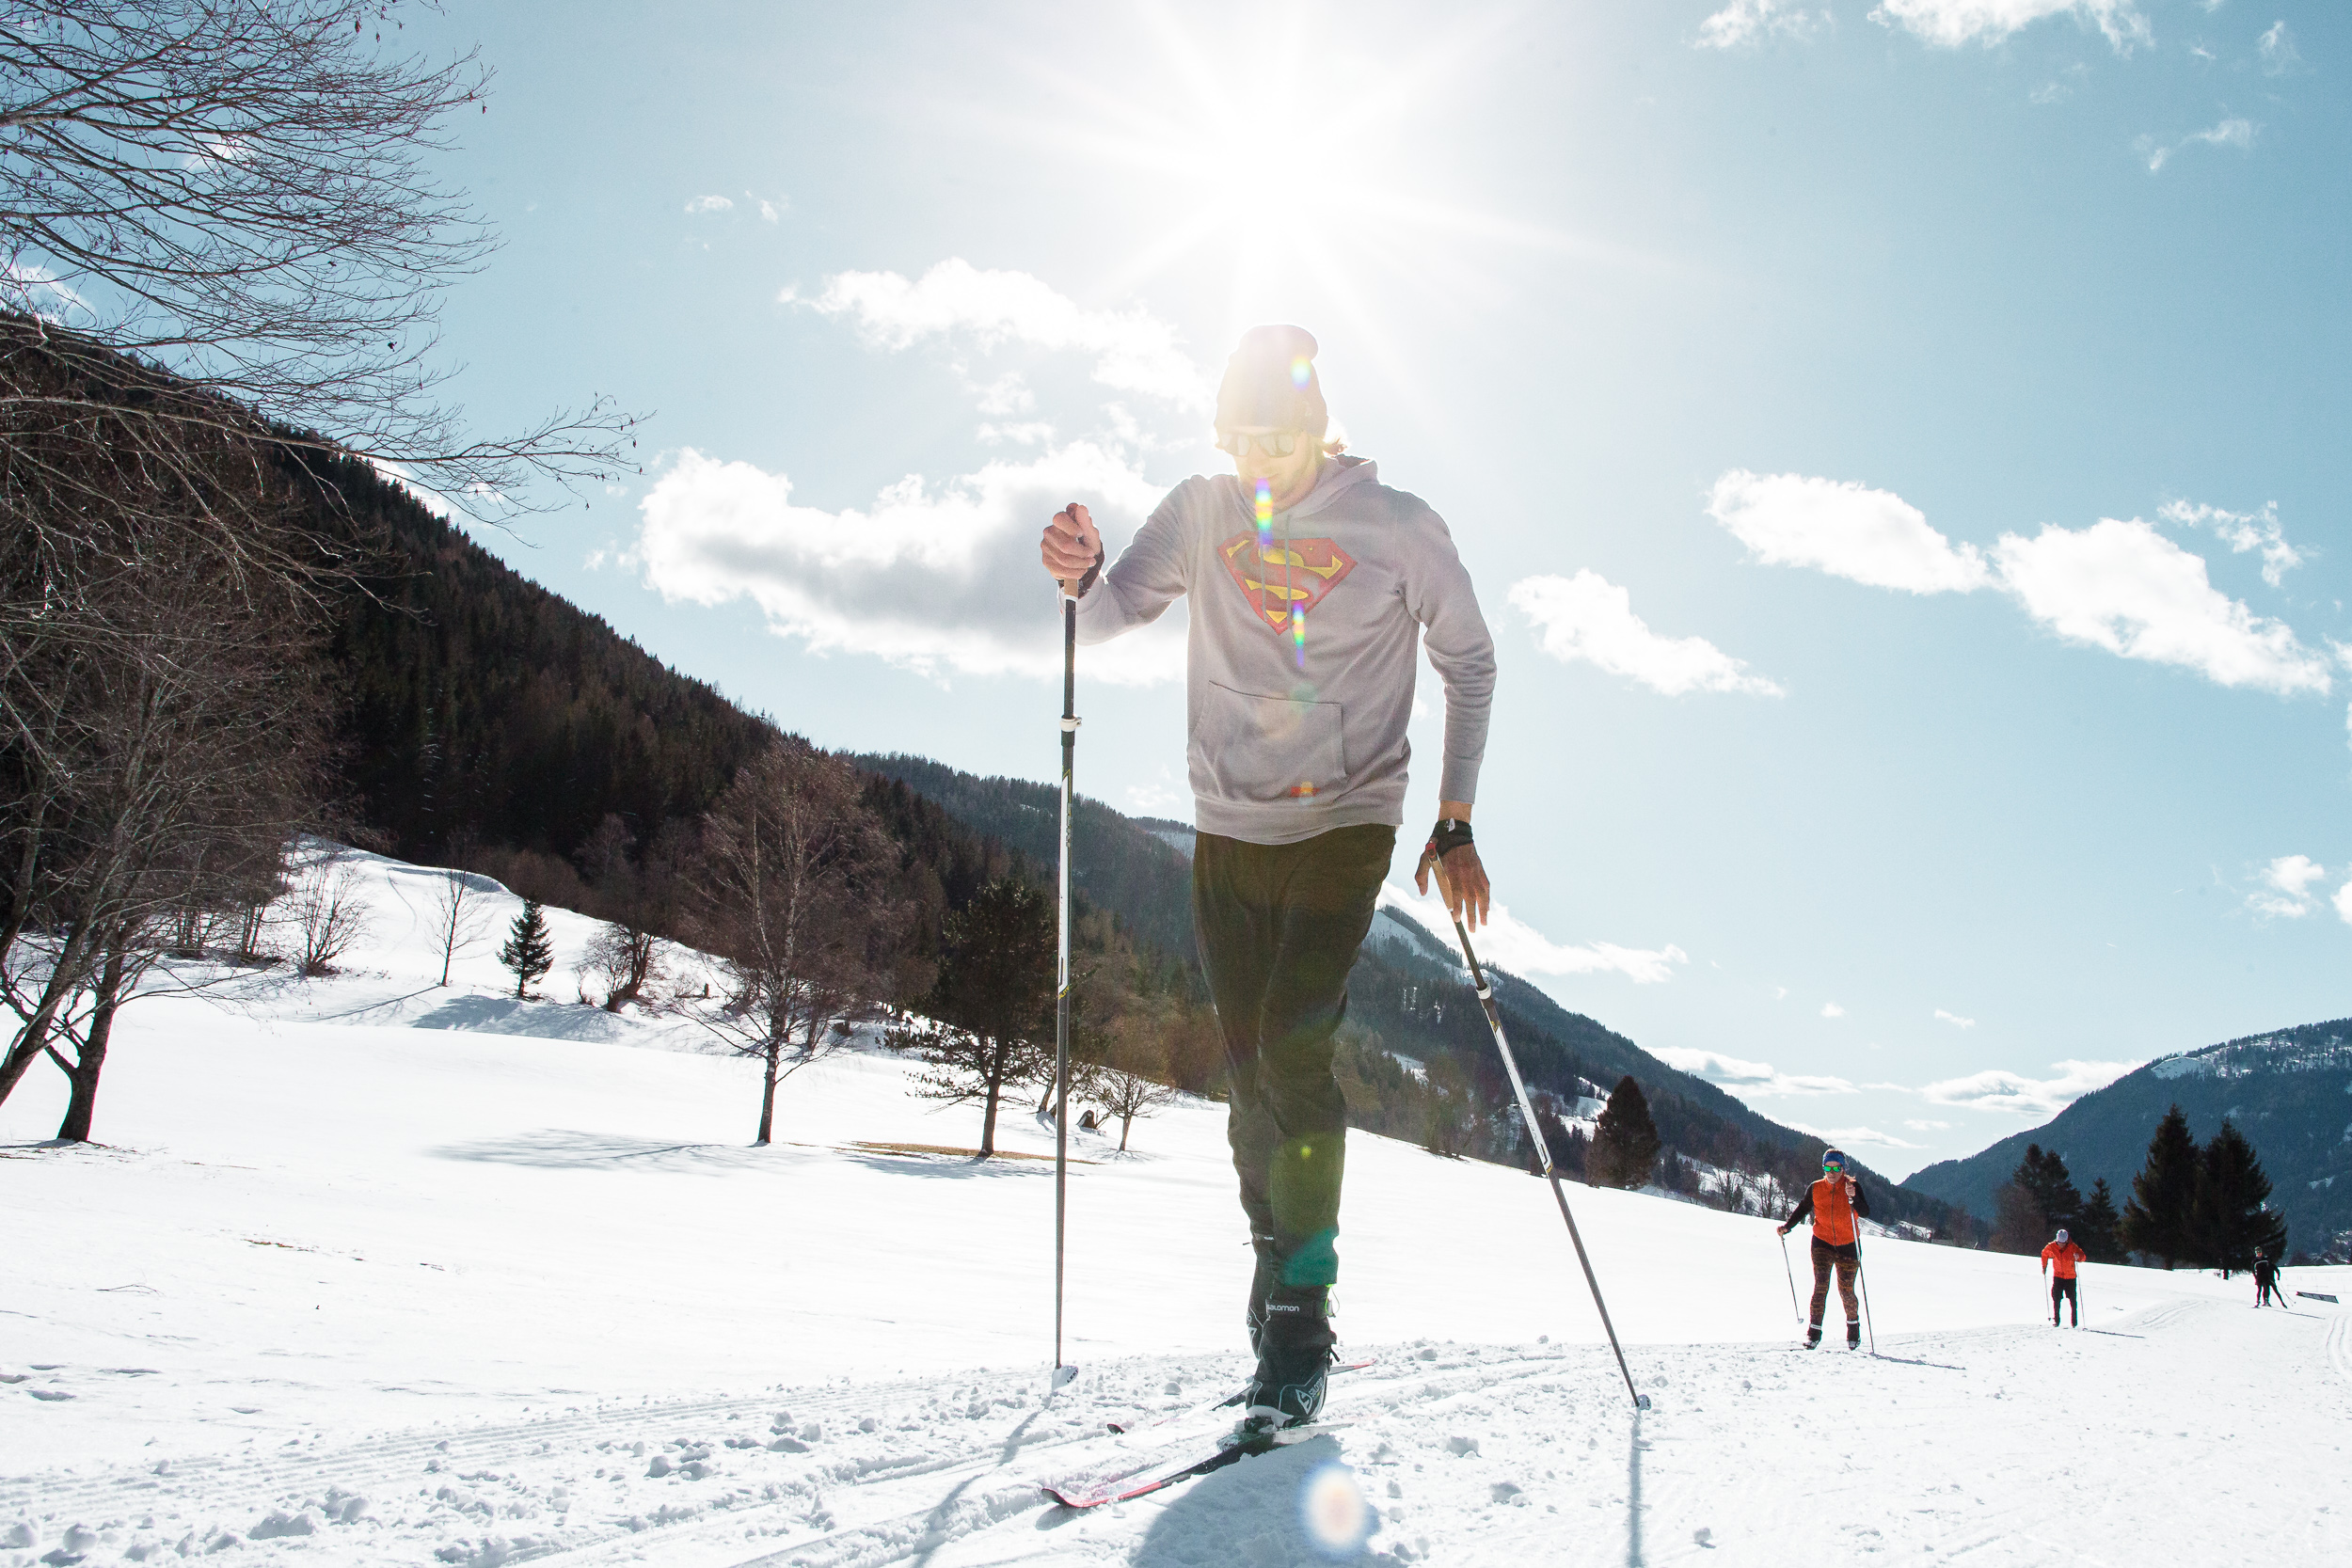 Off the slopes: Cross-country skiing on the Römerloipe in Bad Kleinkirchheim - Cross-country skiing in the beautiful Nockberge mountains in Carinthia.